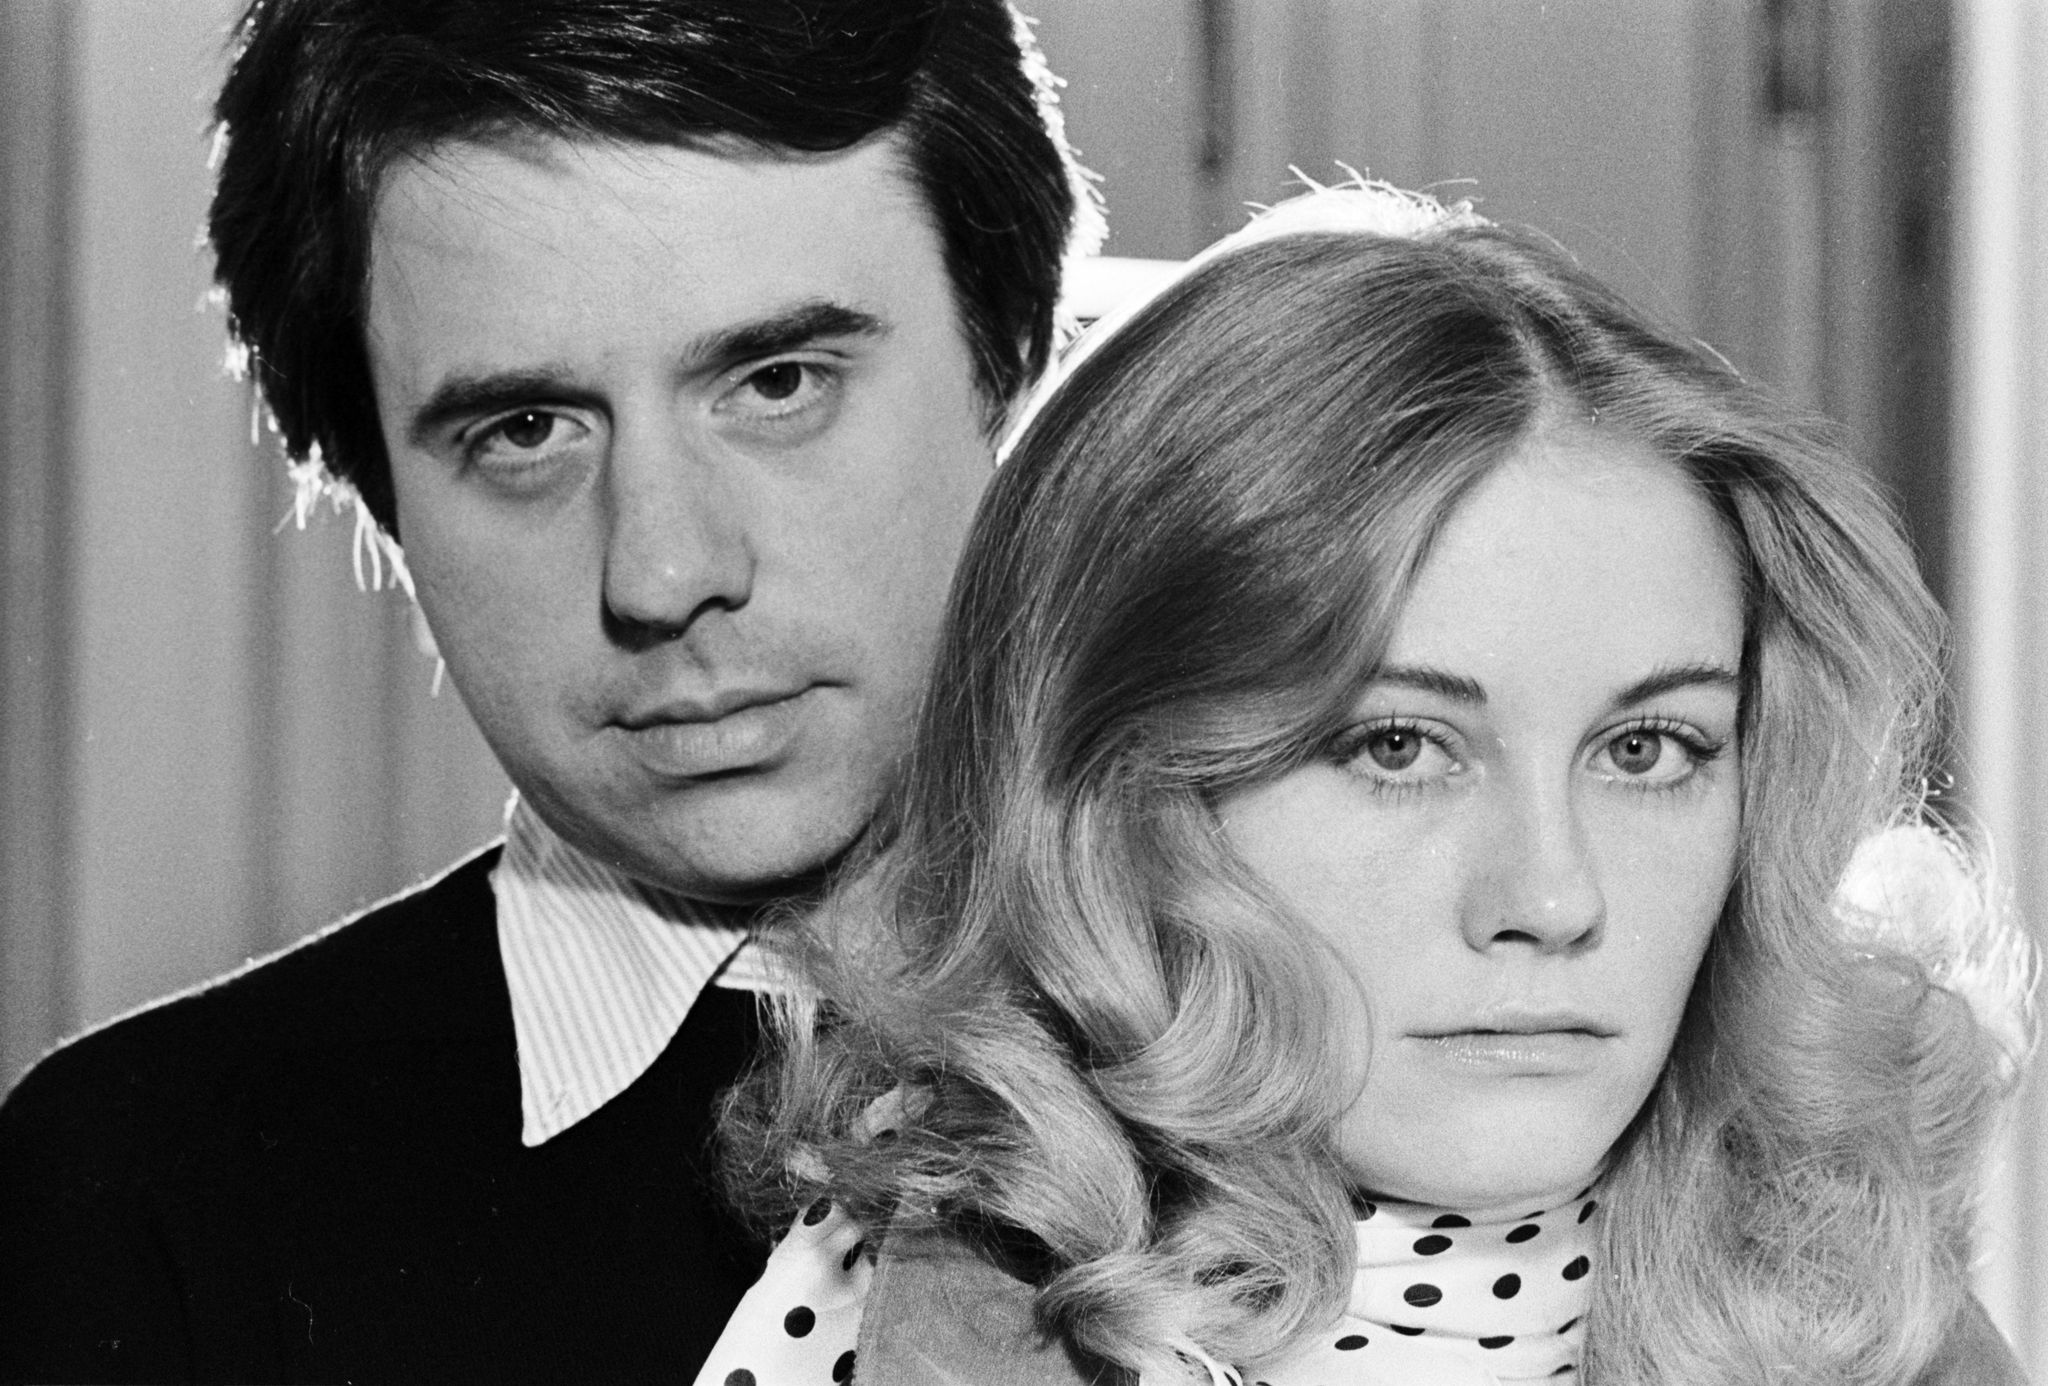 film director peter bogdanovich with actress cybill shepherd photographed in may 1974 just prior to the release of daisy miller photo by jack mitchellgetty images